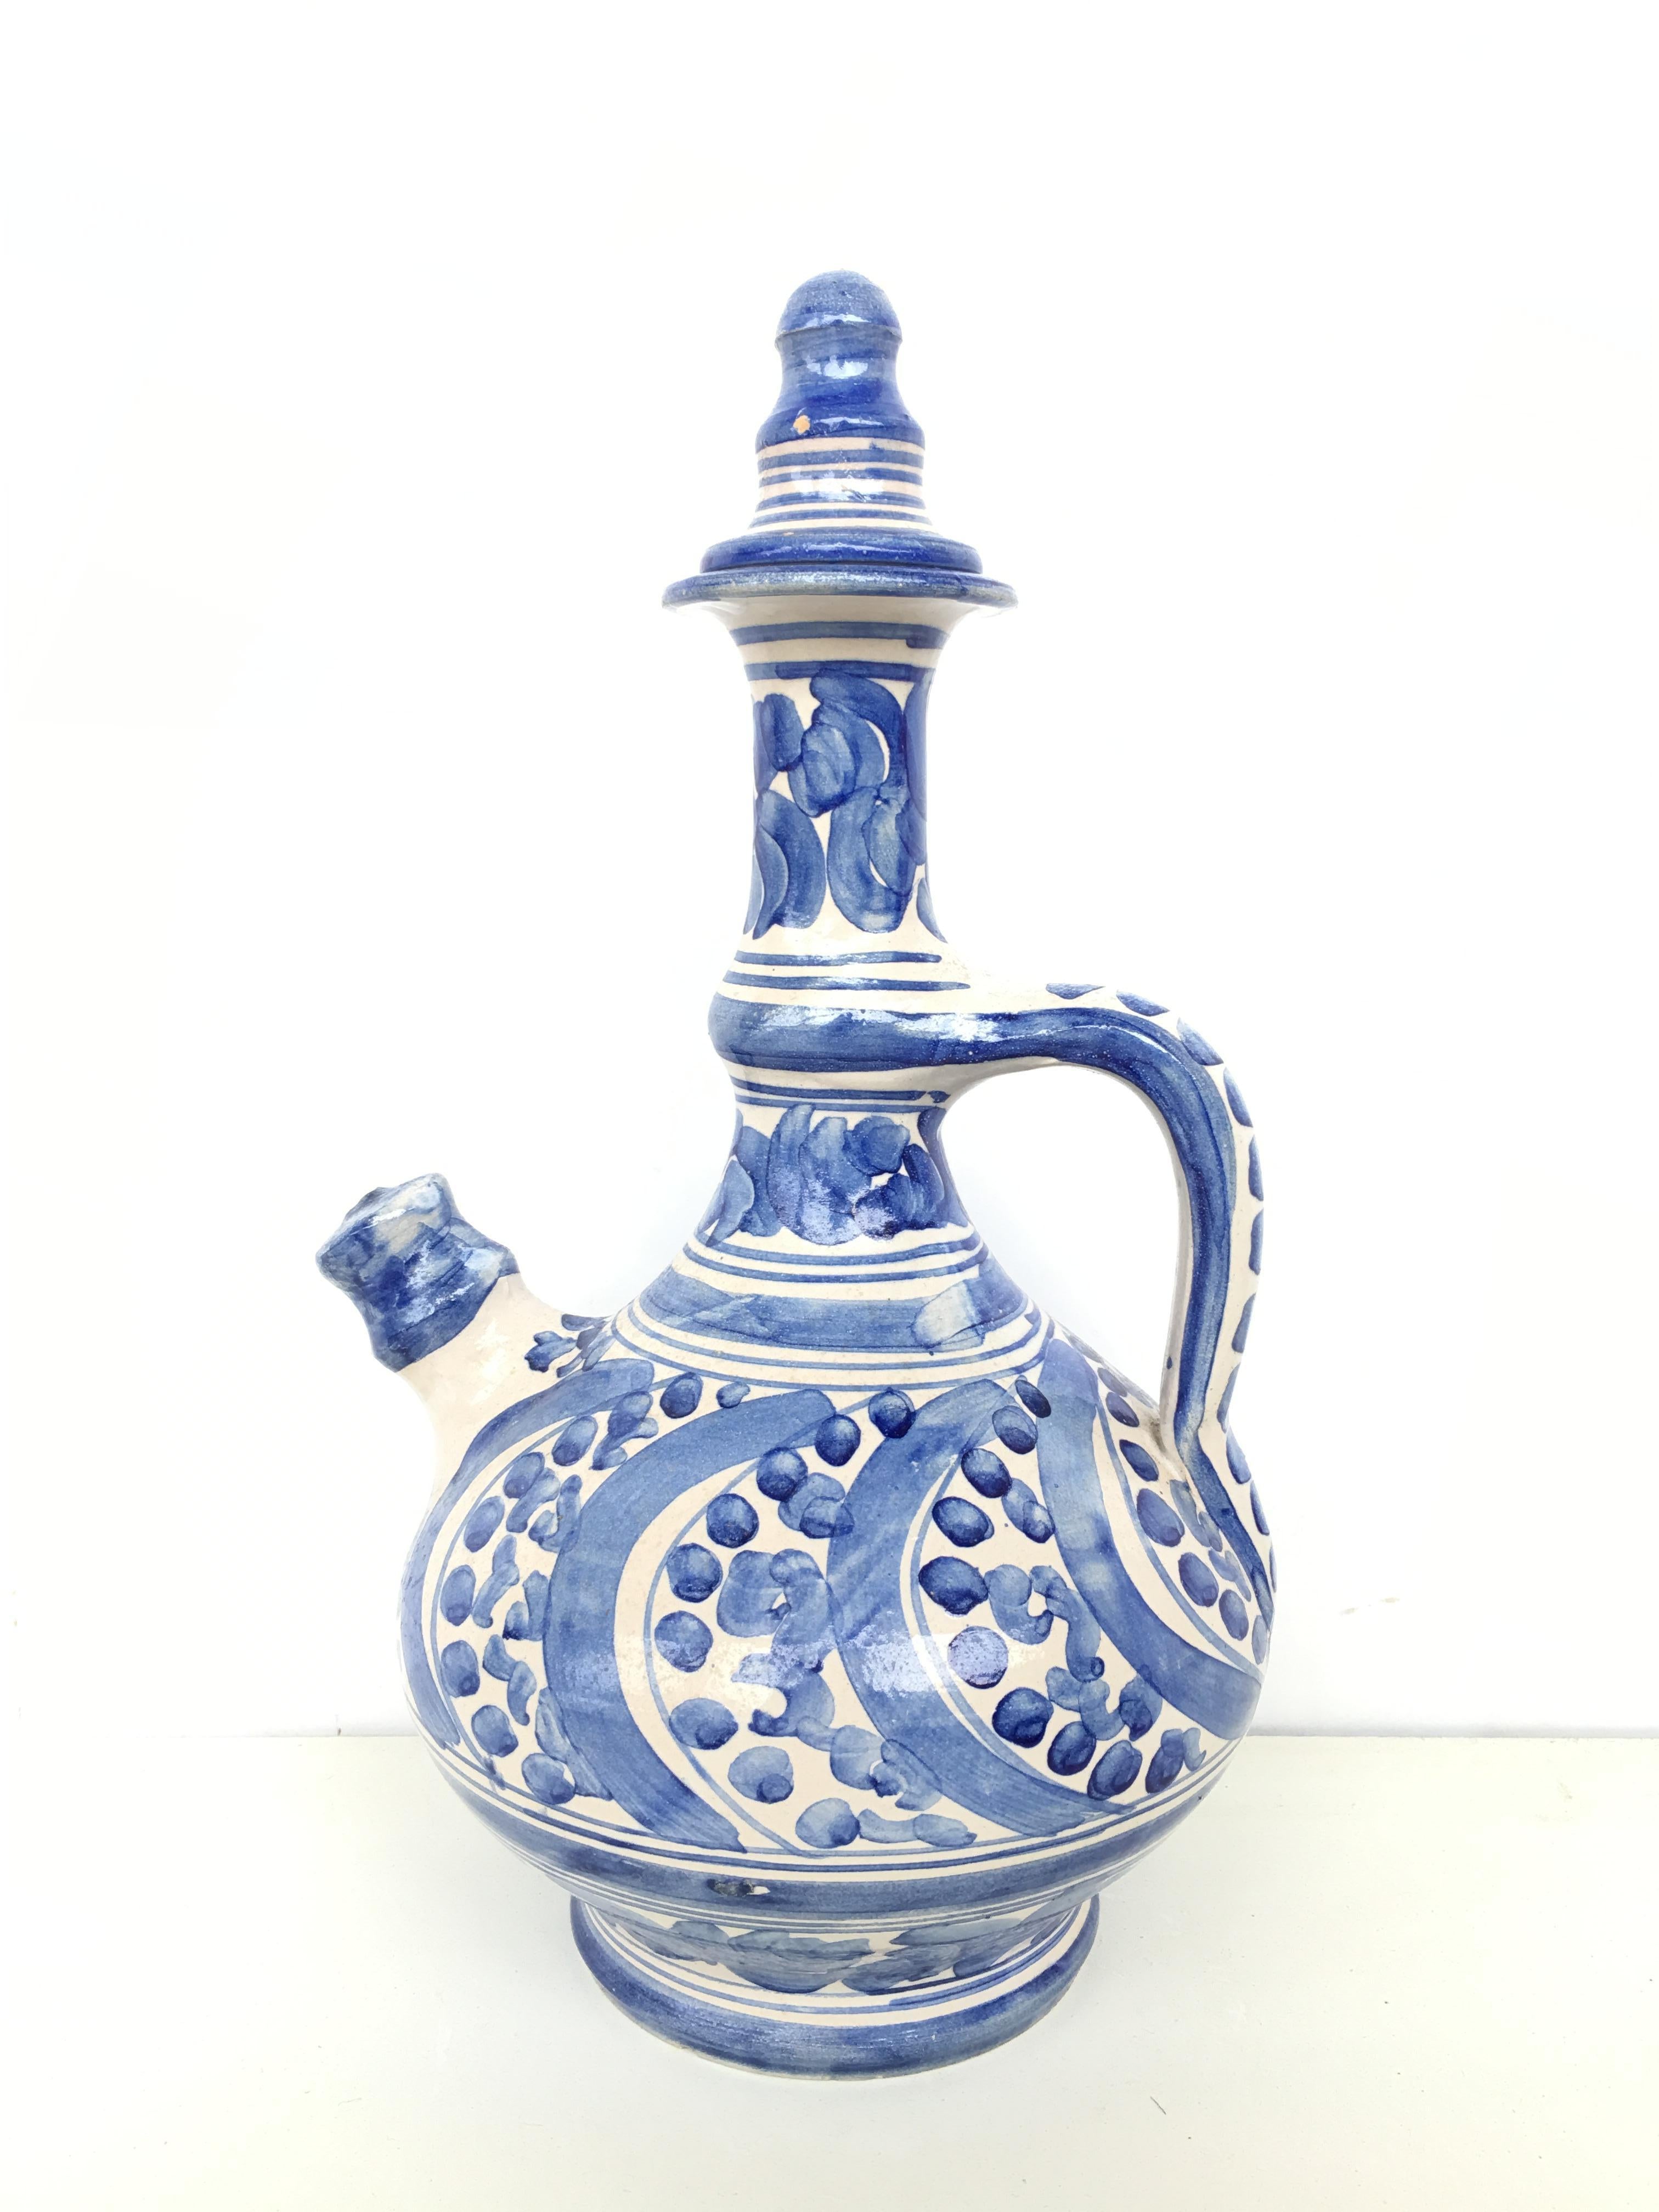 A striking Spanish glazed earthenware handled blue and white painted pitcher , the body underglaze blue ornamental decorated .

It´s a 